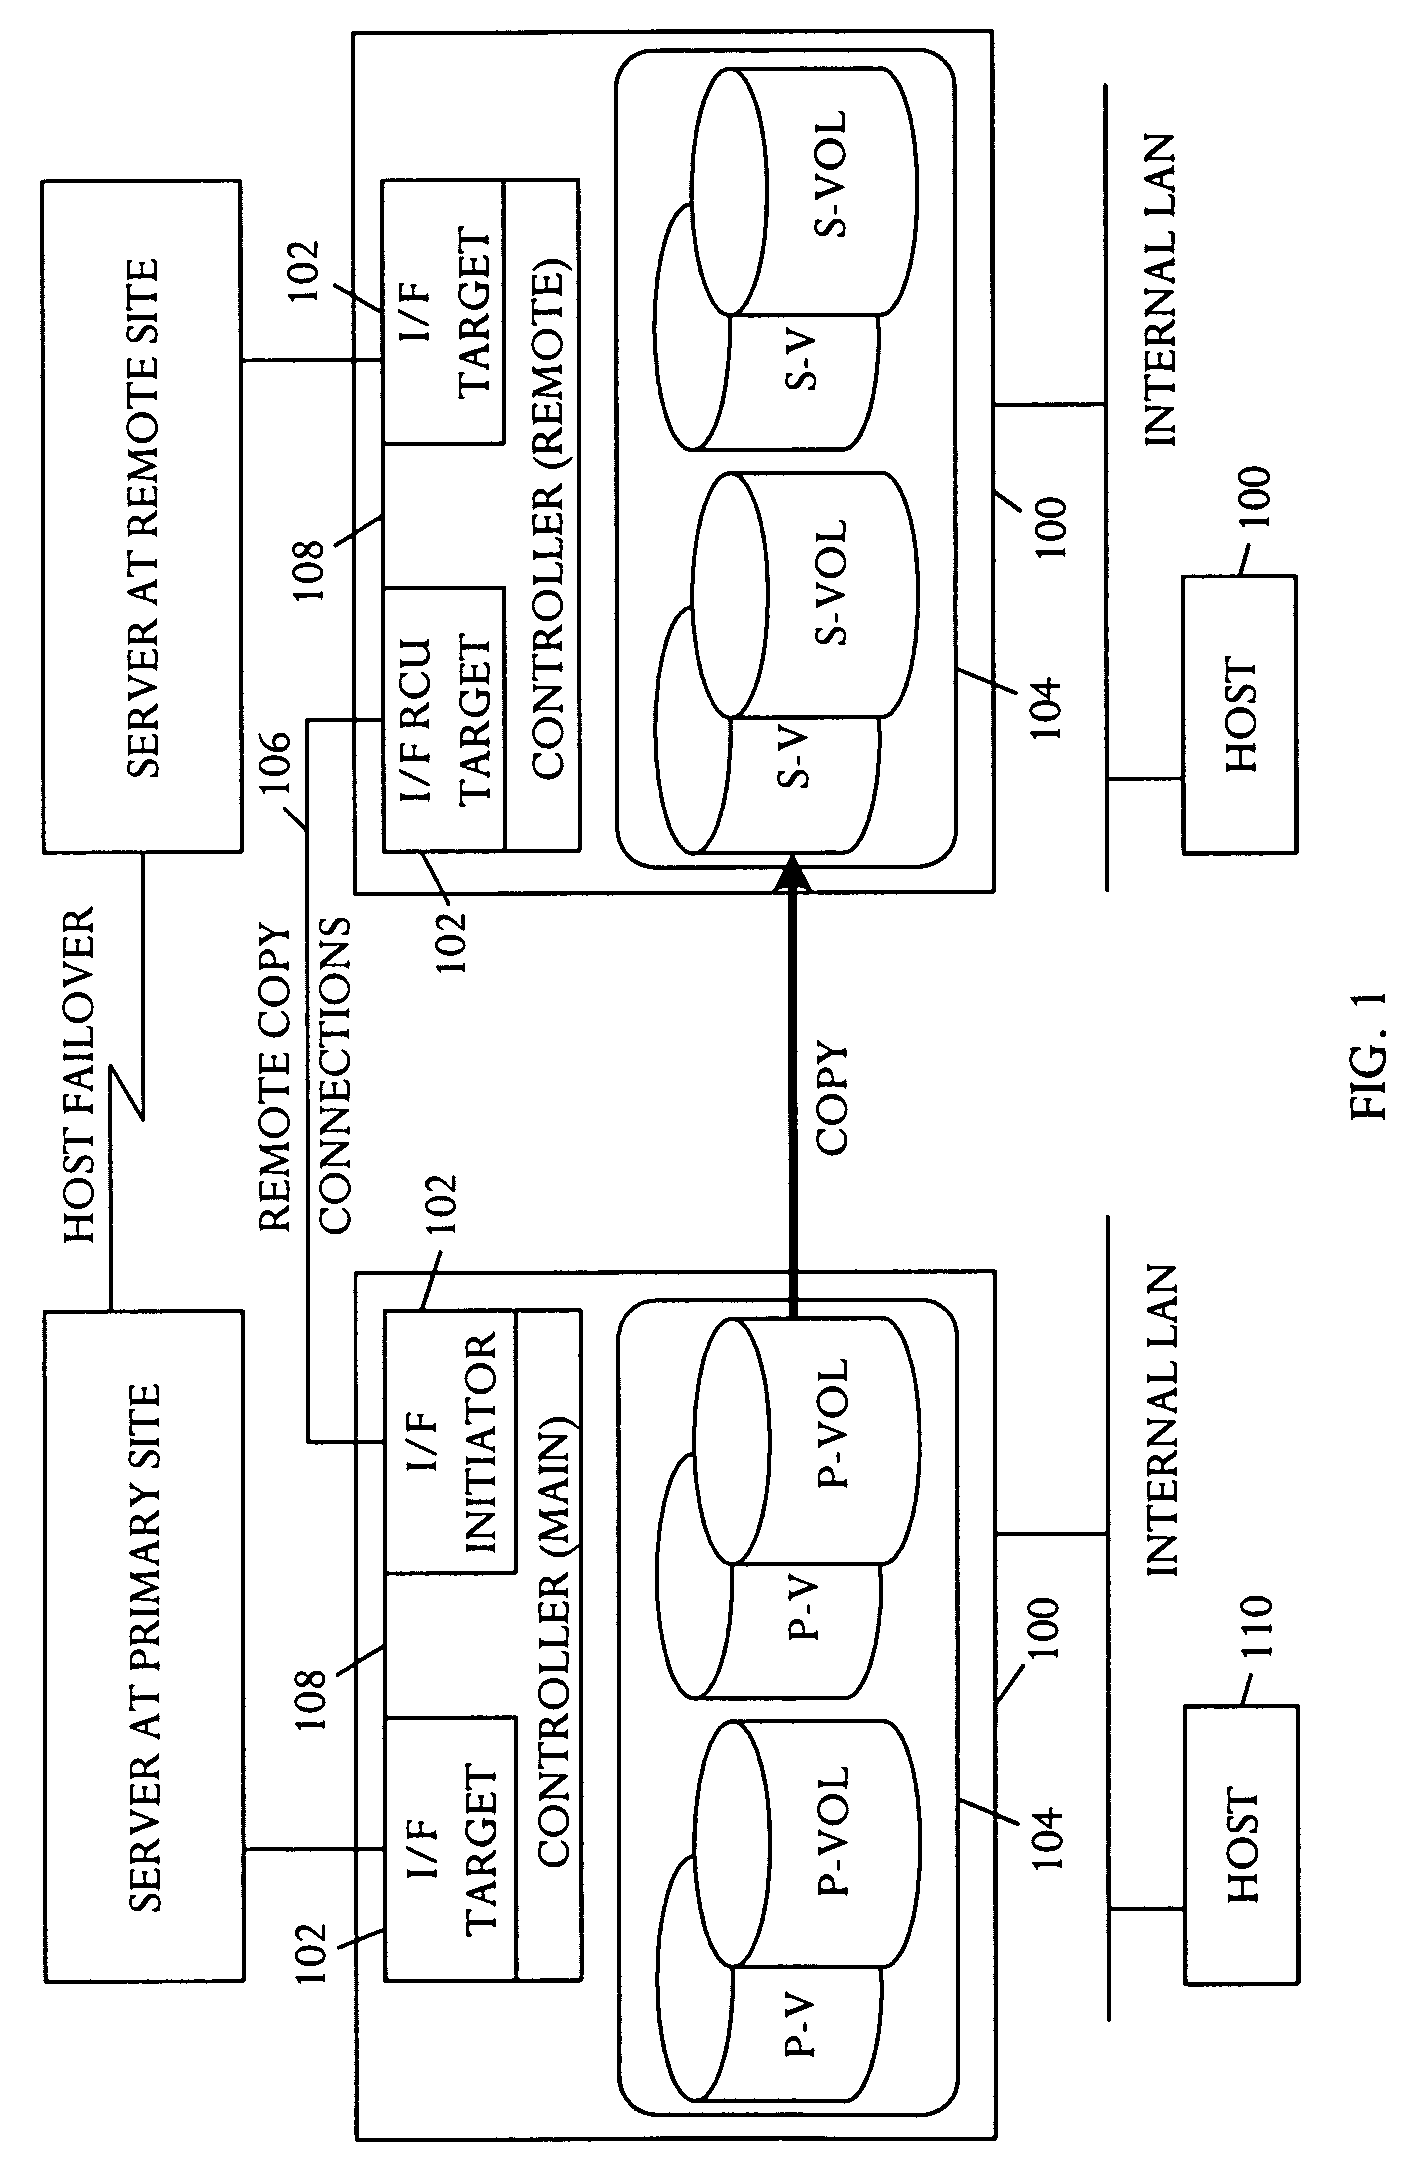 Storage system with link selection control